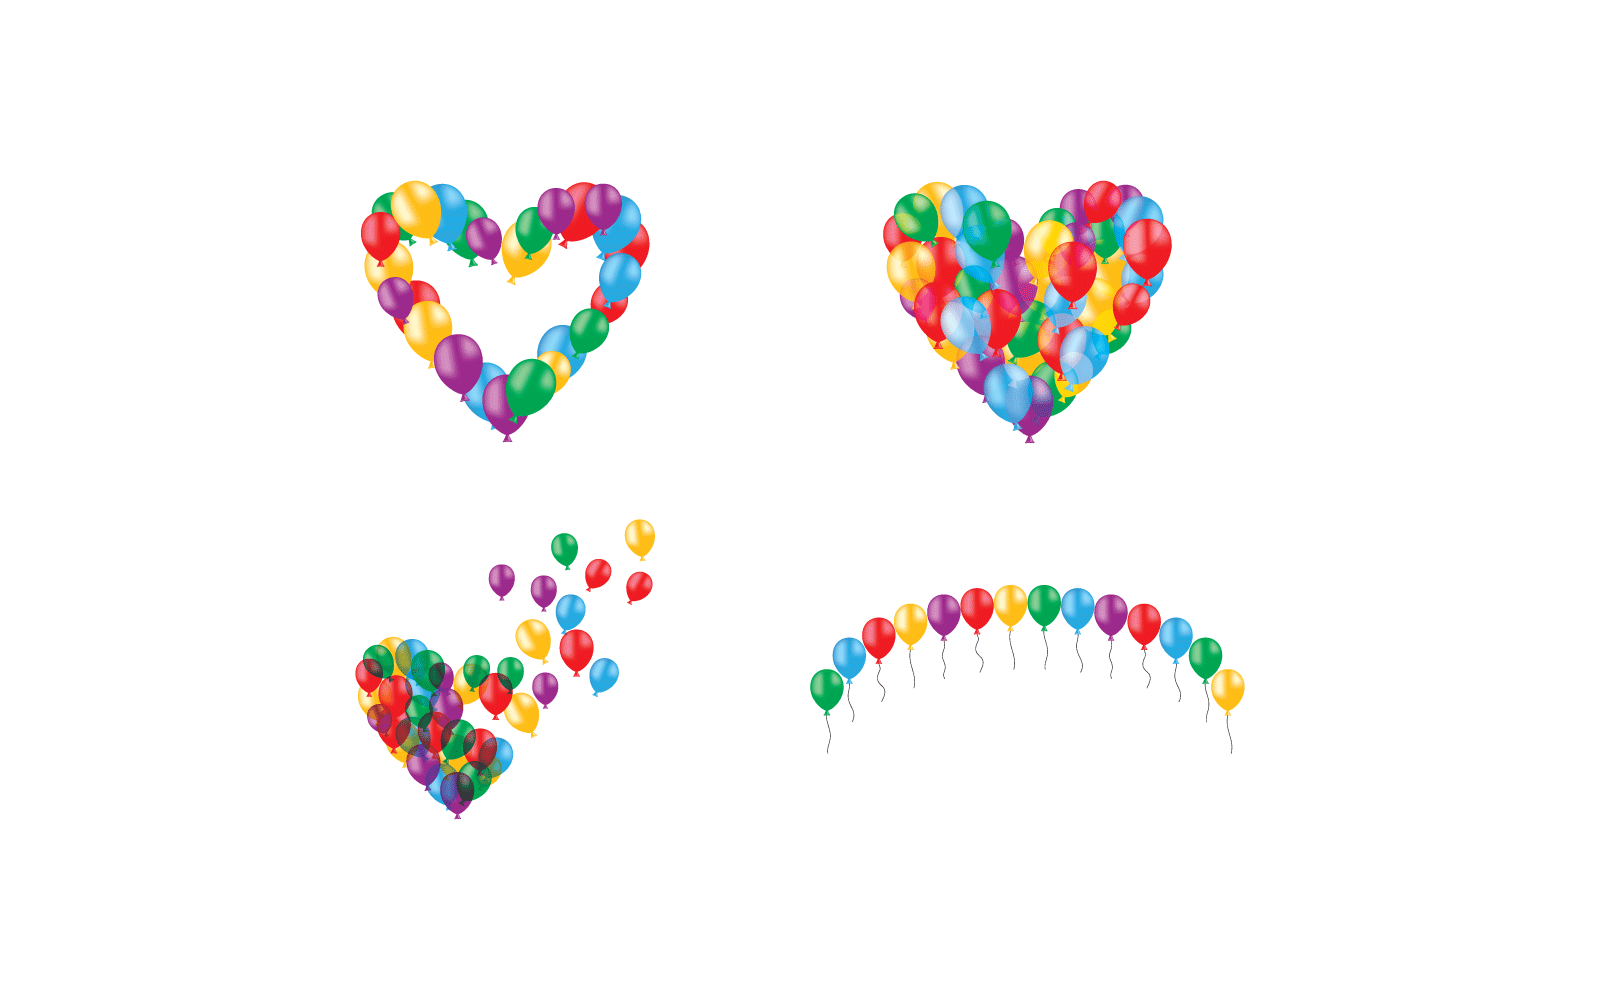 Realistic balloon collection illustration on white background